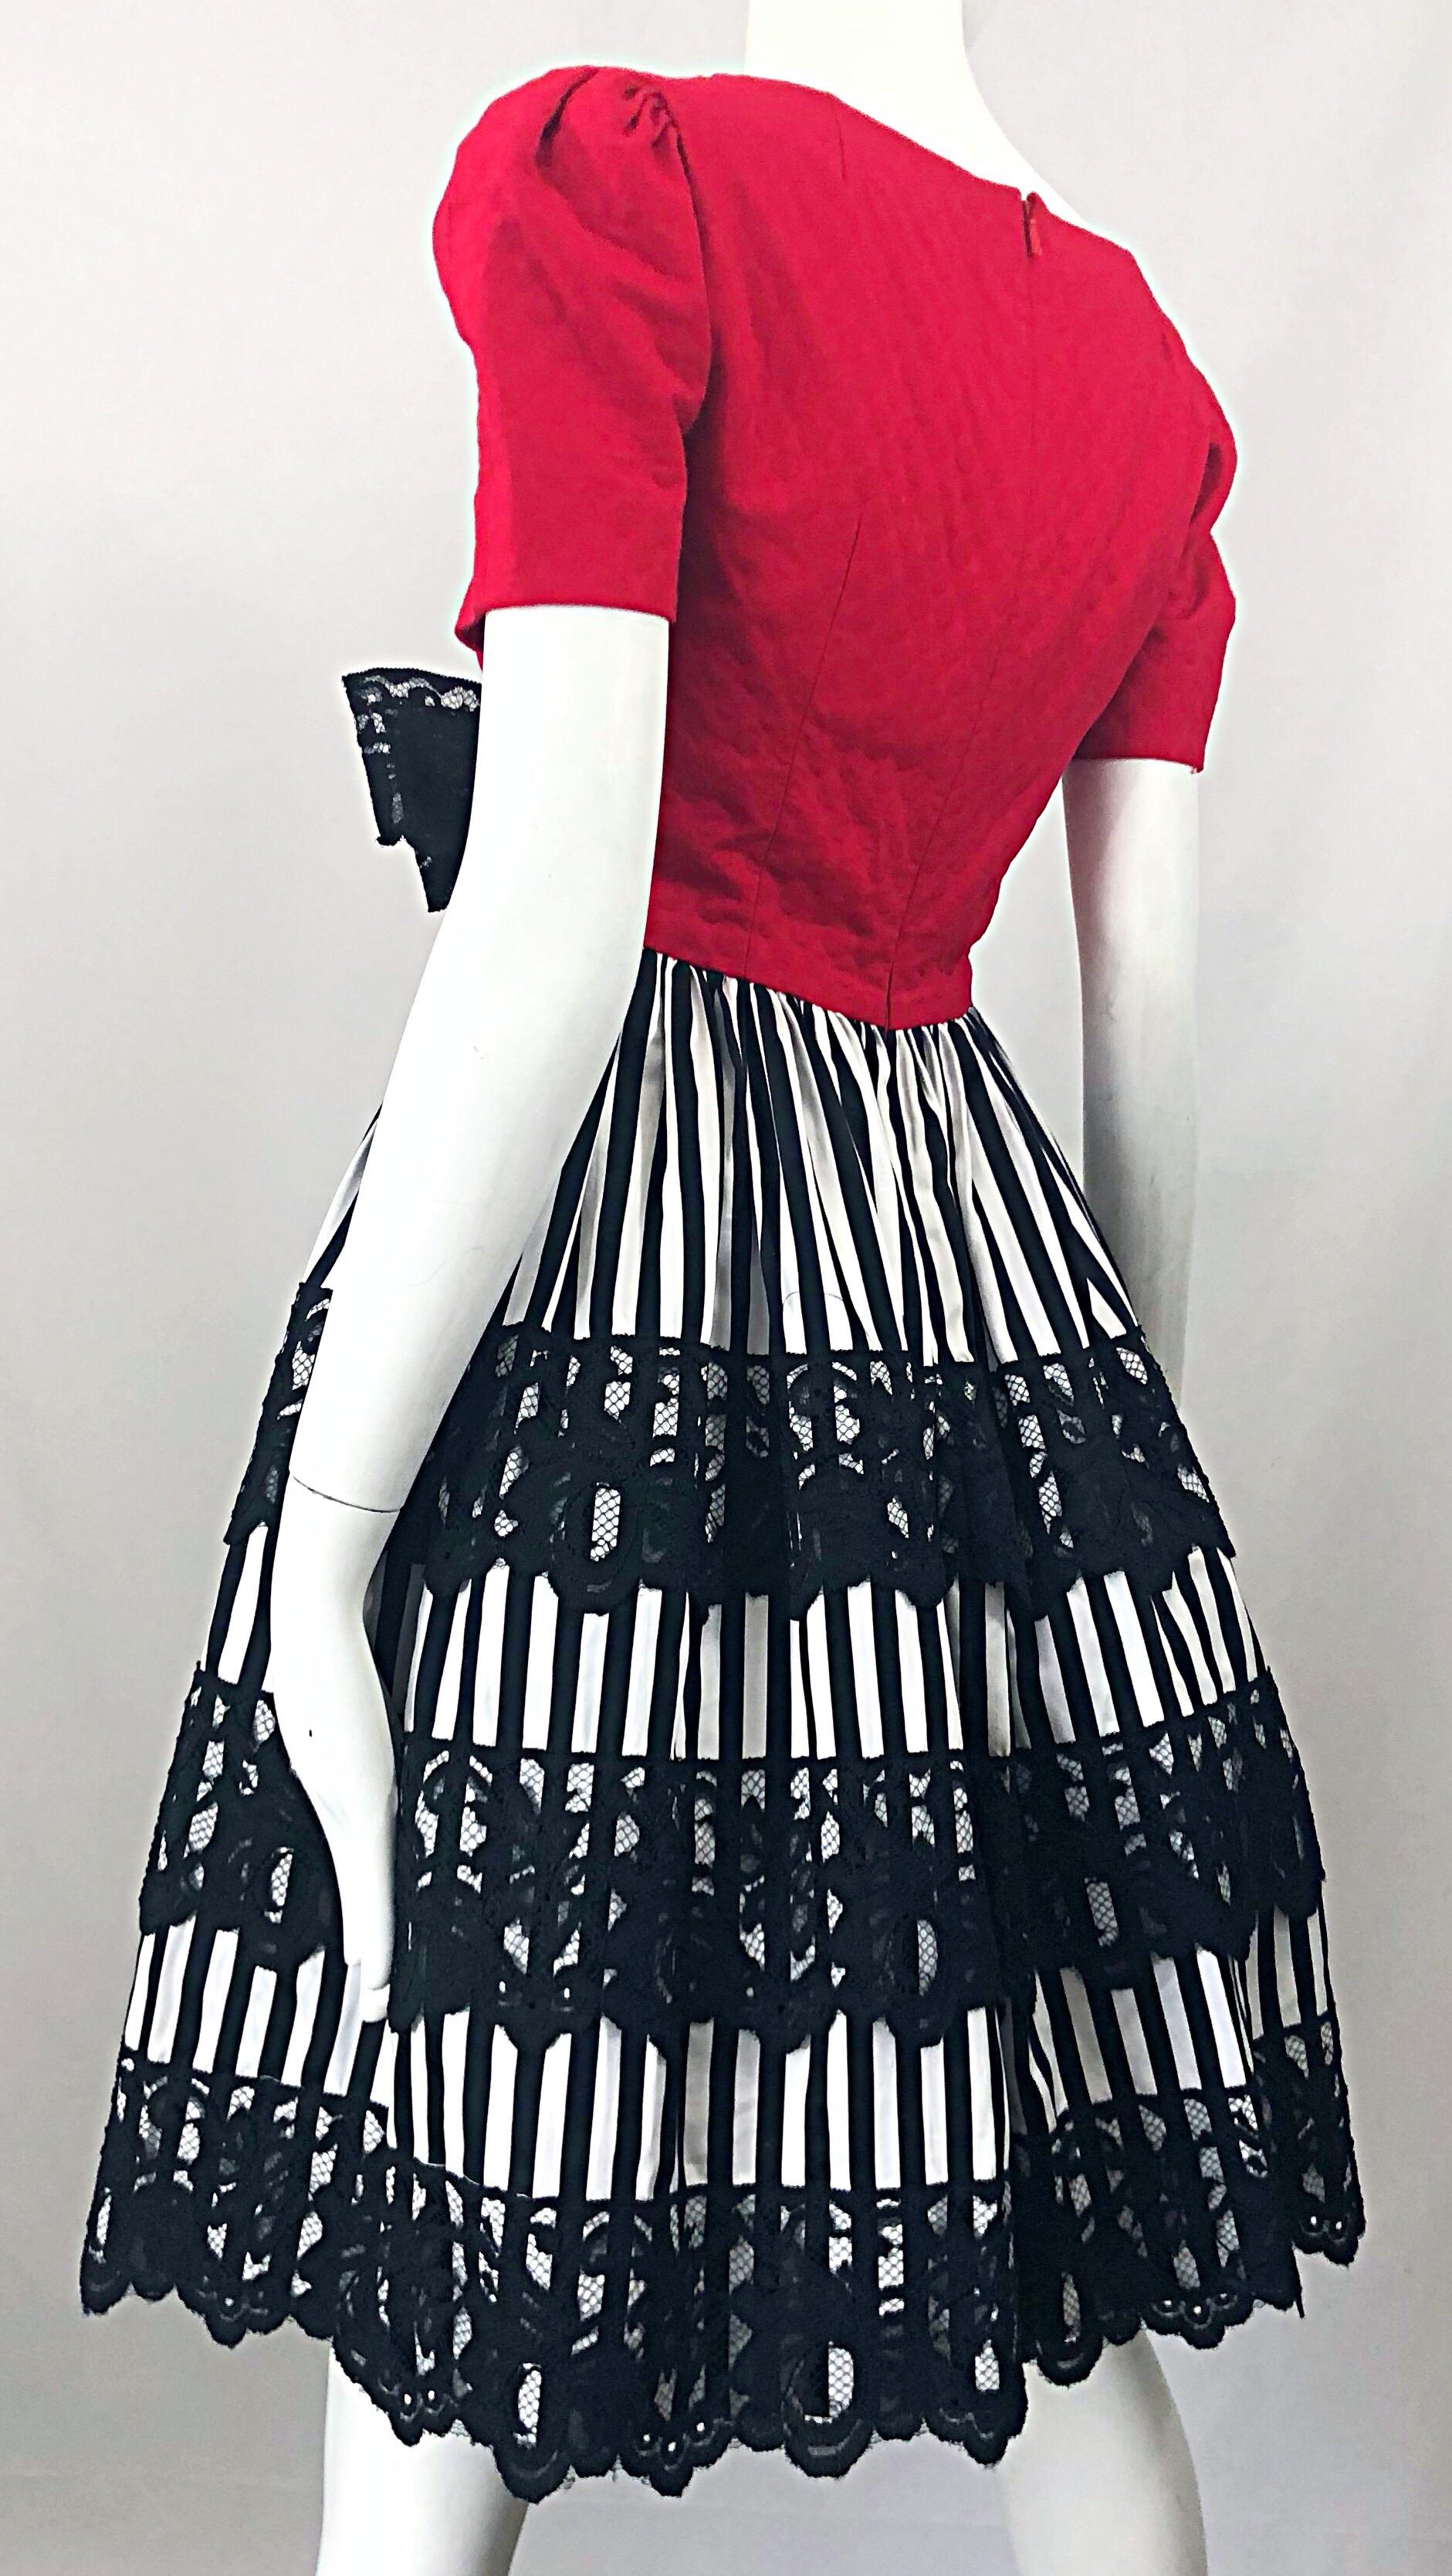 Vintage Adele Simpson 1980s Red Black White Fit n' Flare Empire Bow Lace Dress 2